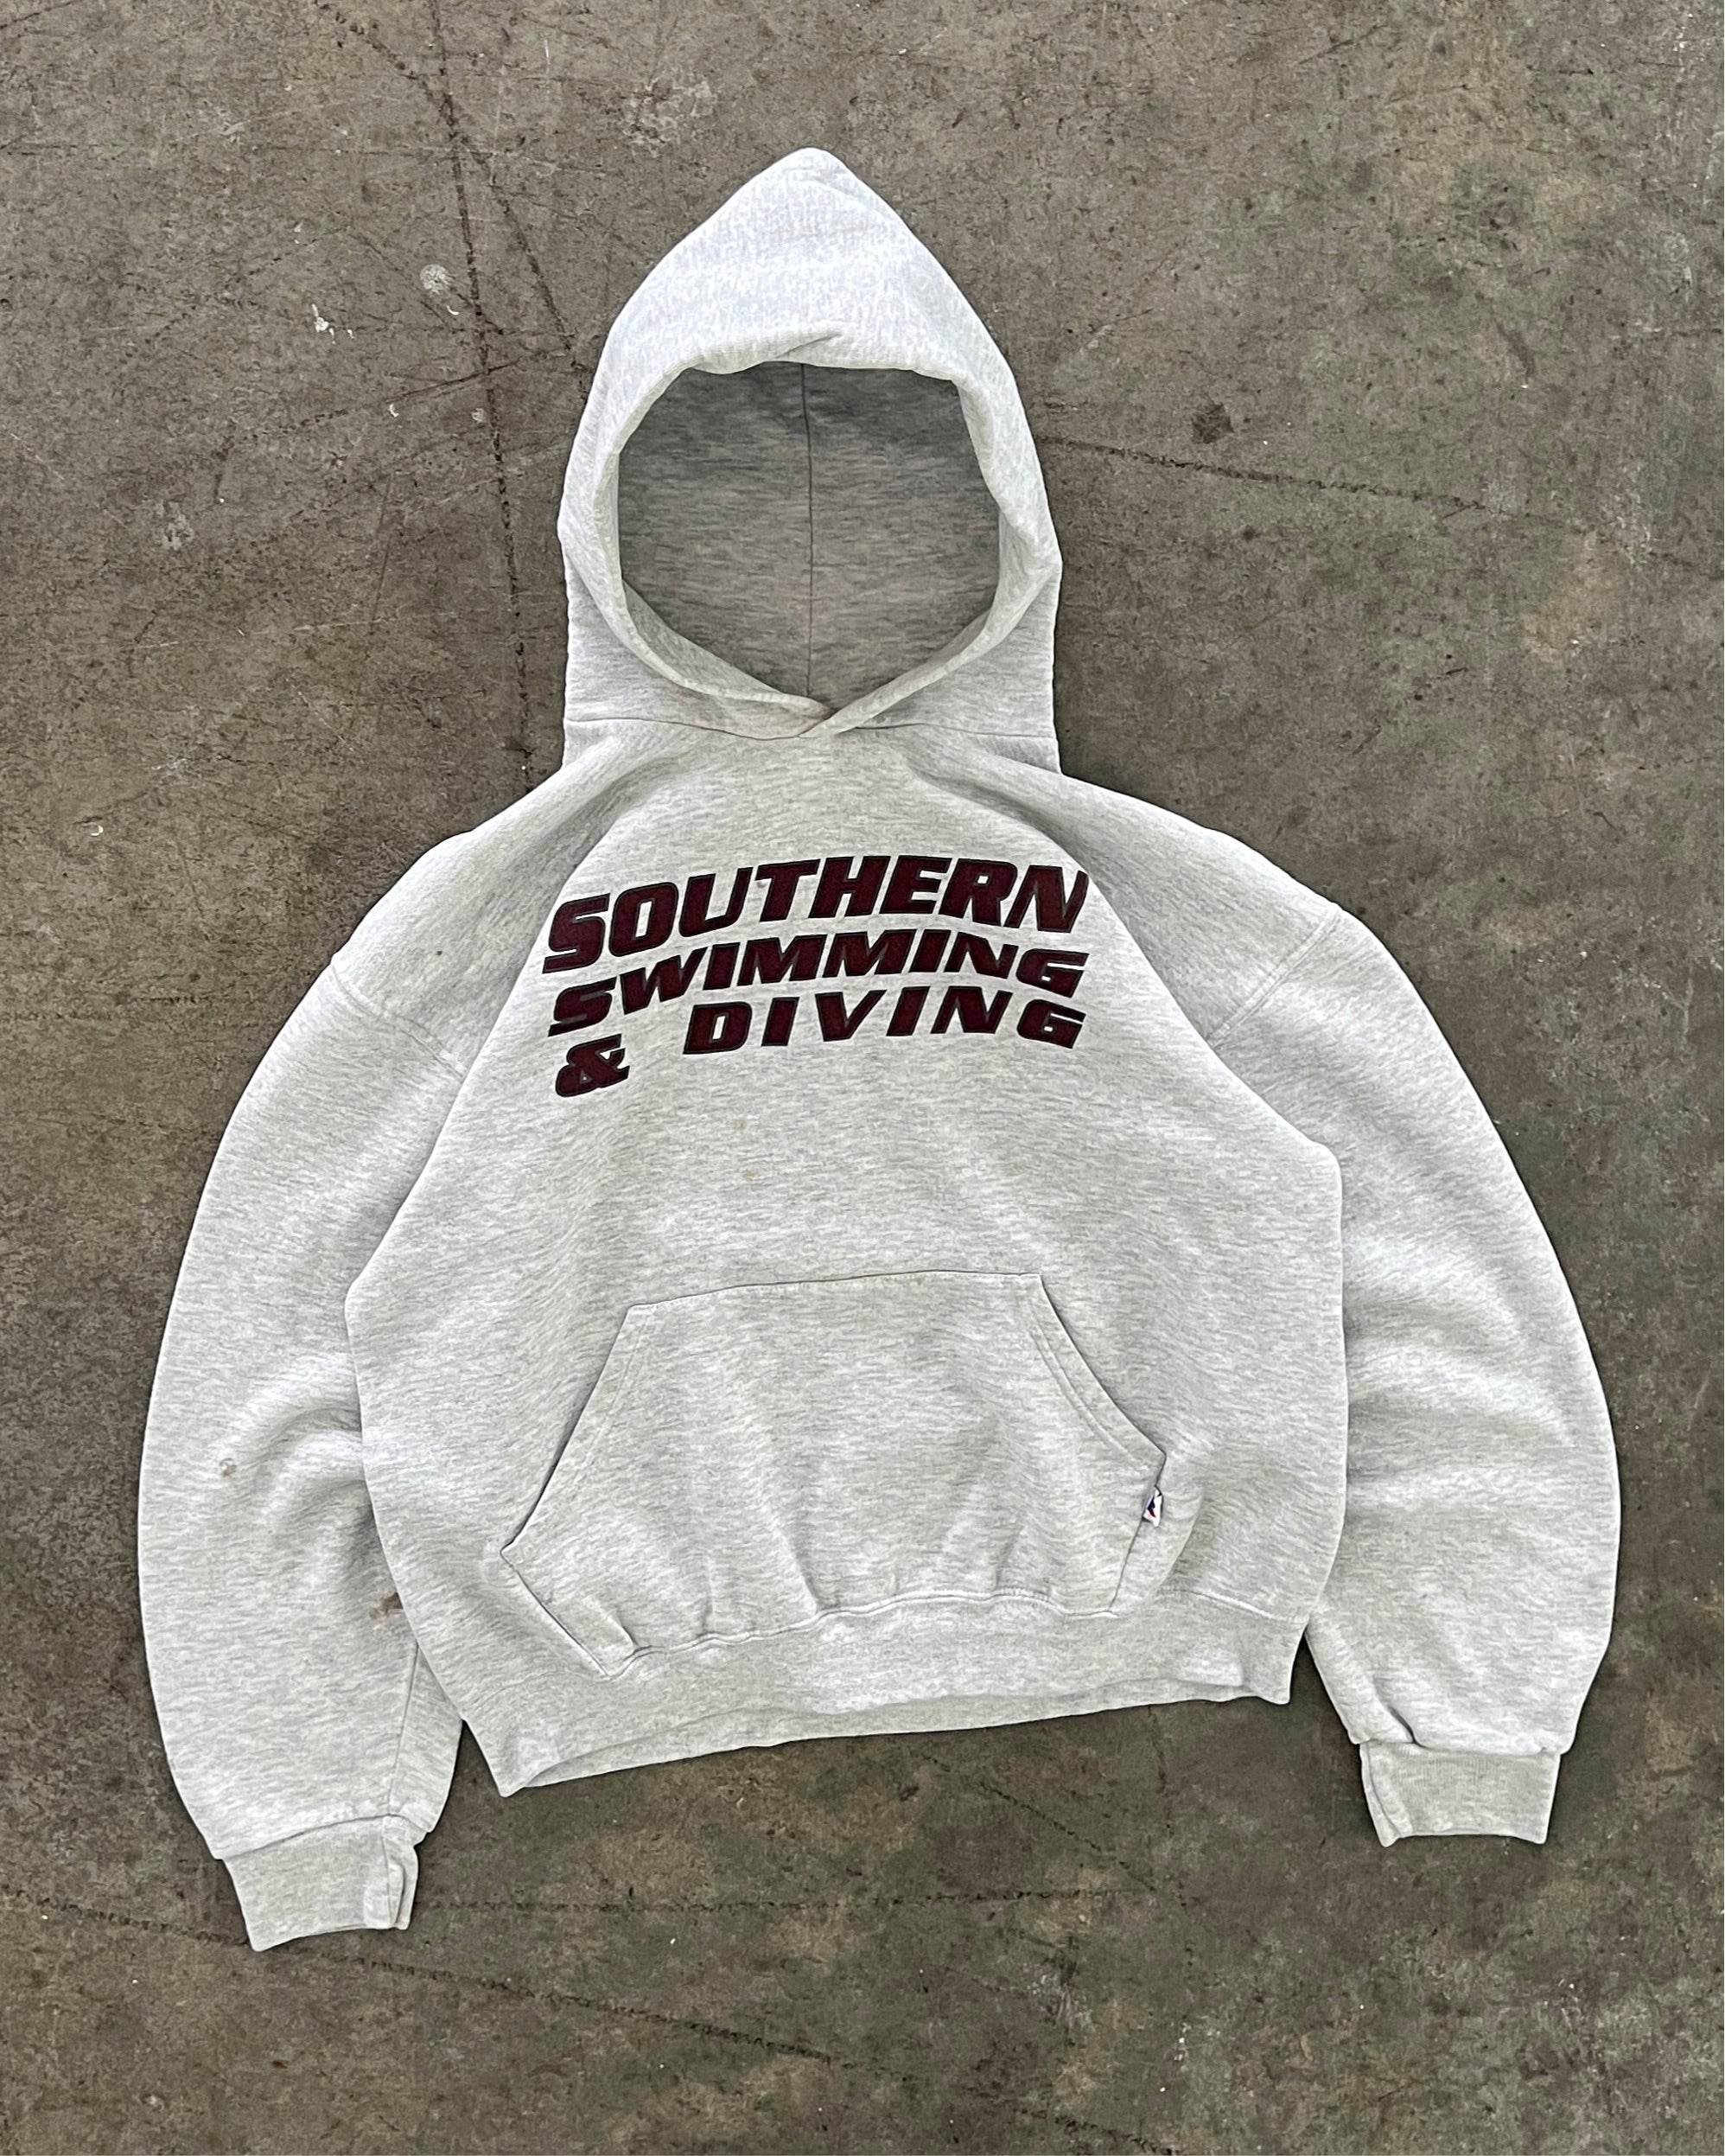 ASH GREY “SOUTHERN SWIMMING & DIVING” RUSSELL HOODIE - 1990S – AKIMBO CLUB